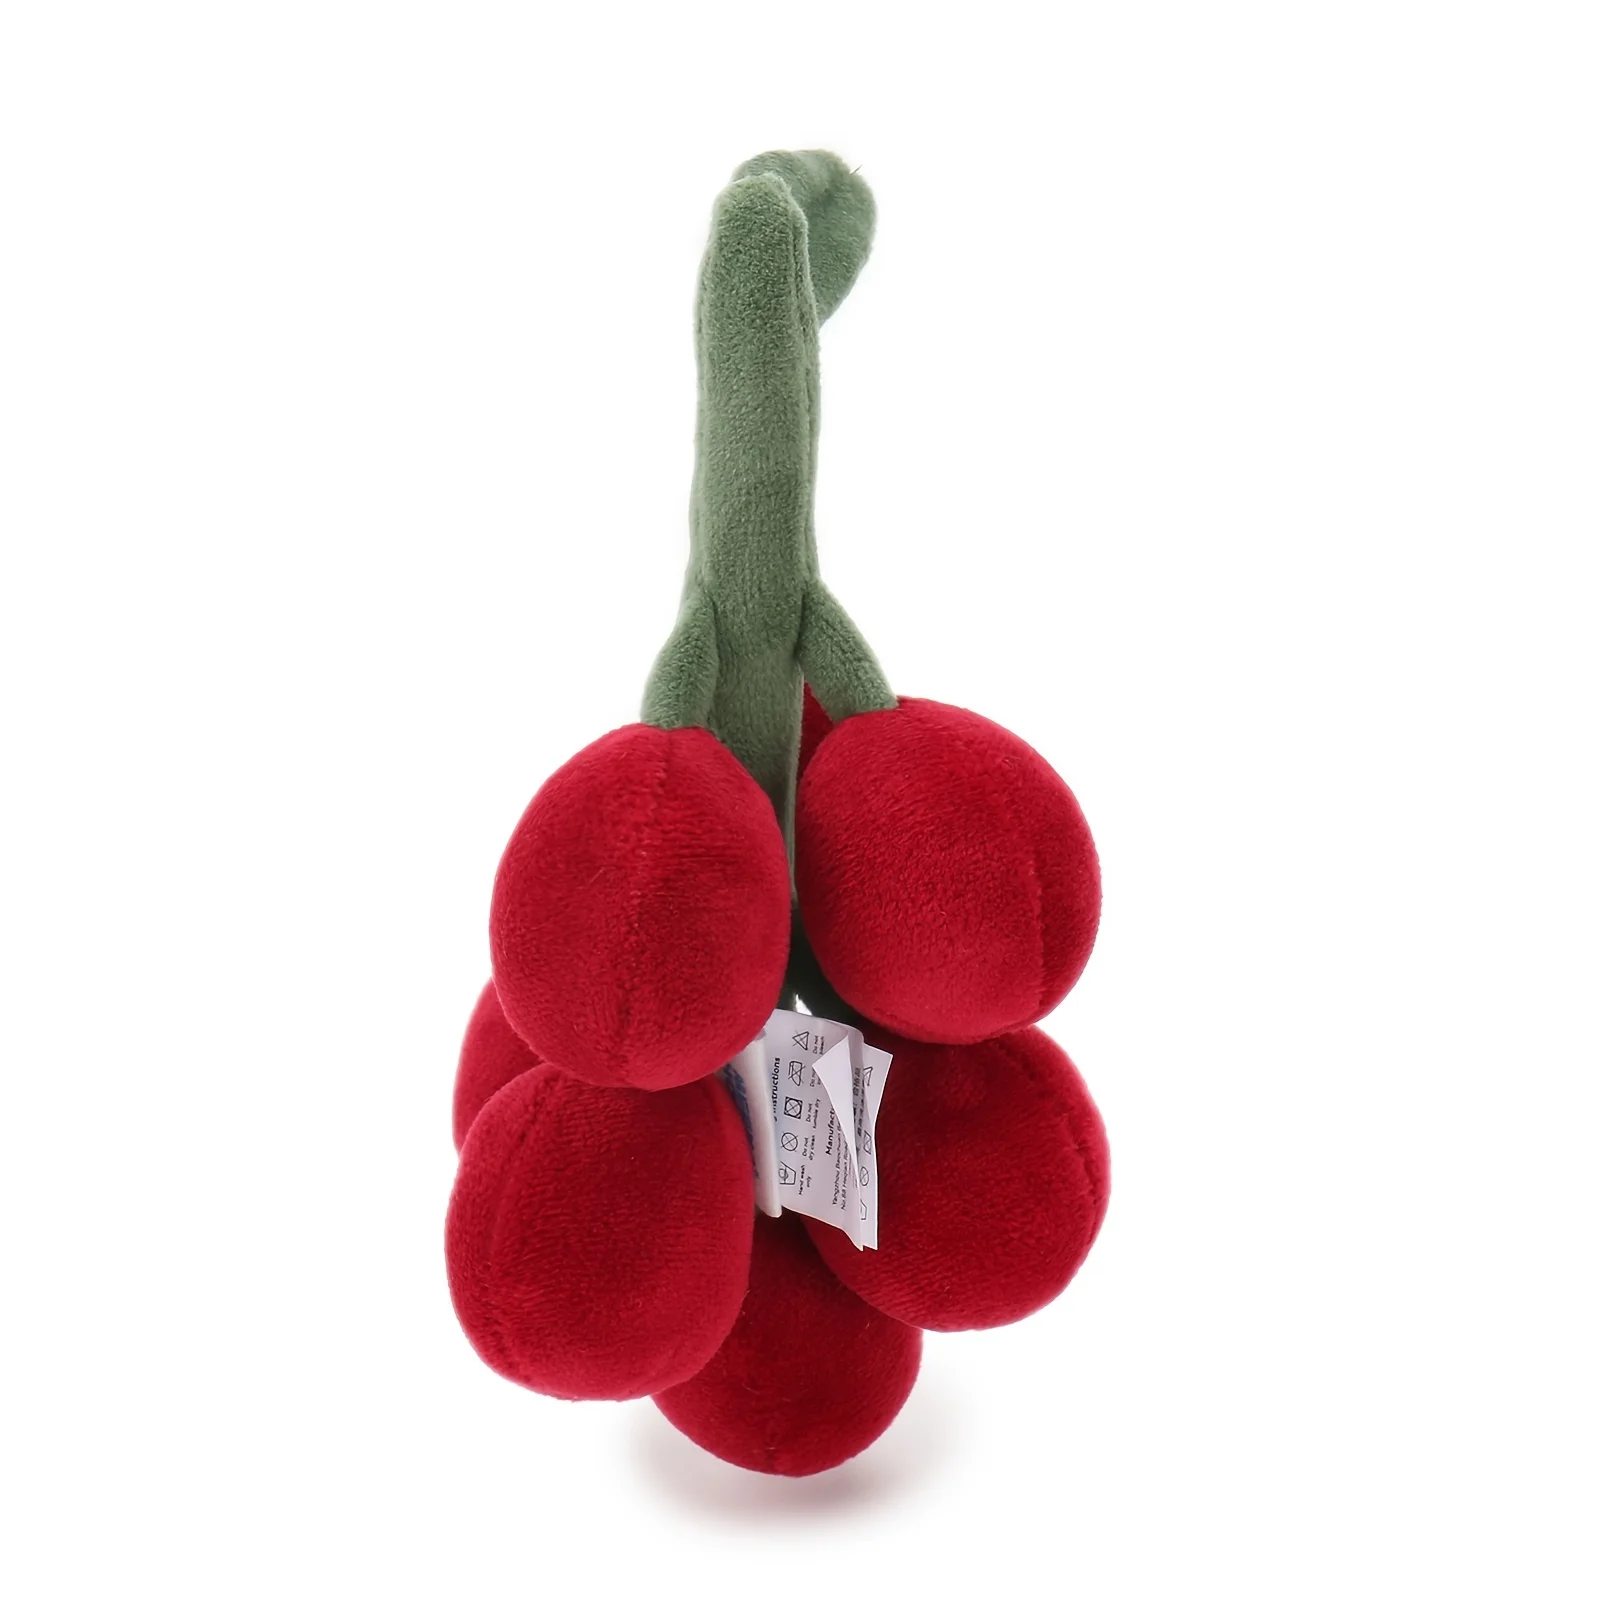 Red Grapes Plush Toy | Stuffed Fruit Paradise Series - Soft Baby Soother -2